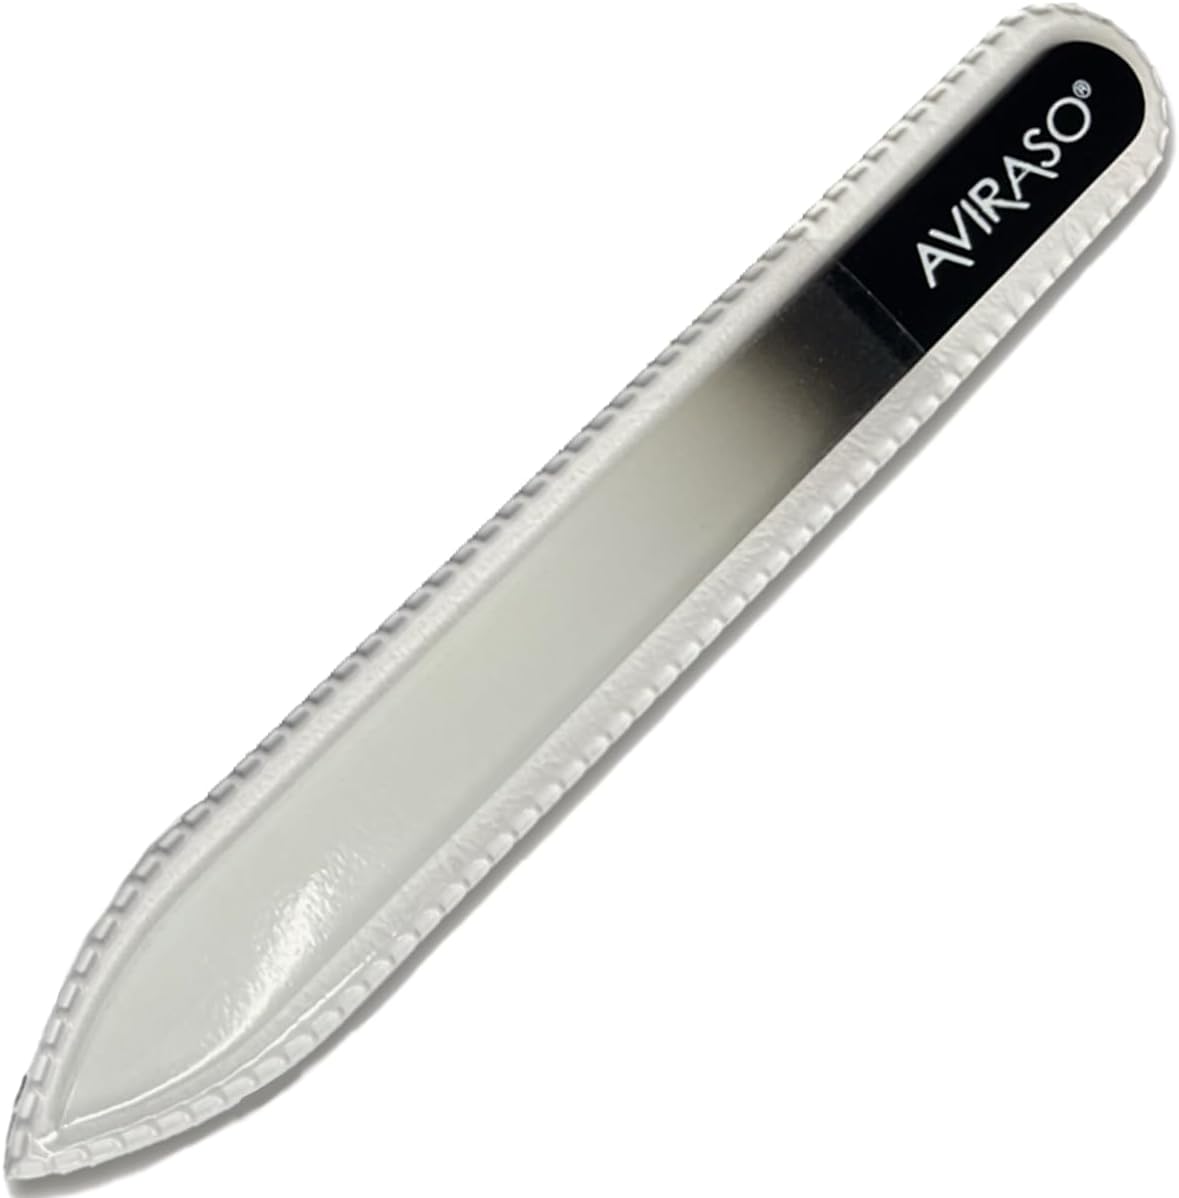 AVIRASO Original Premium Bohemia Crystal Glass Nail File on Both Sides with Protective Cover for All Nails - 14 cm - Manicure - Gentle Precision Files - Glass File Smooths and Protects Nails (Black)